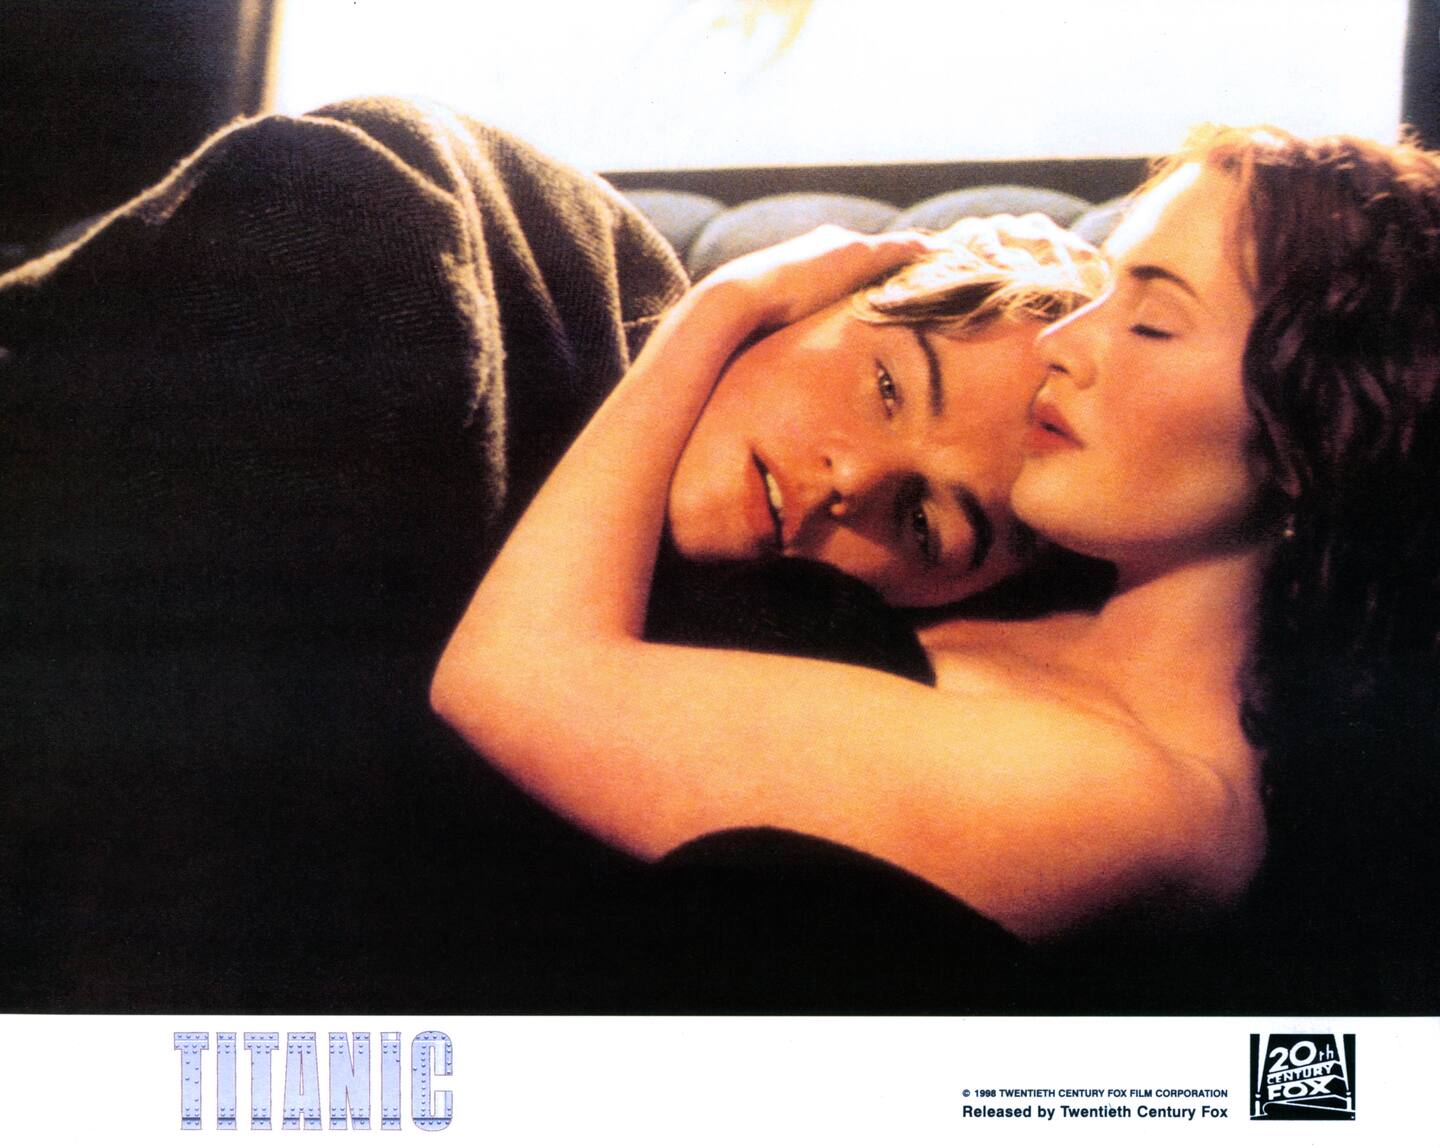 Leonardo DiCaprio and Kate Winslet in bed in a scene from the film 'Titanic', 1997. Photo / Getty